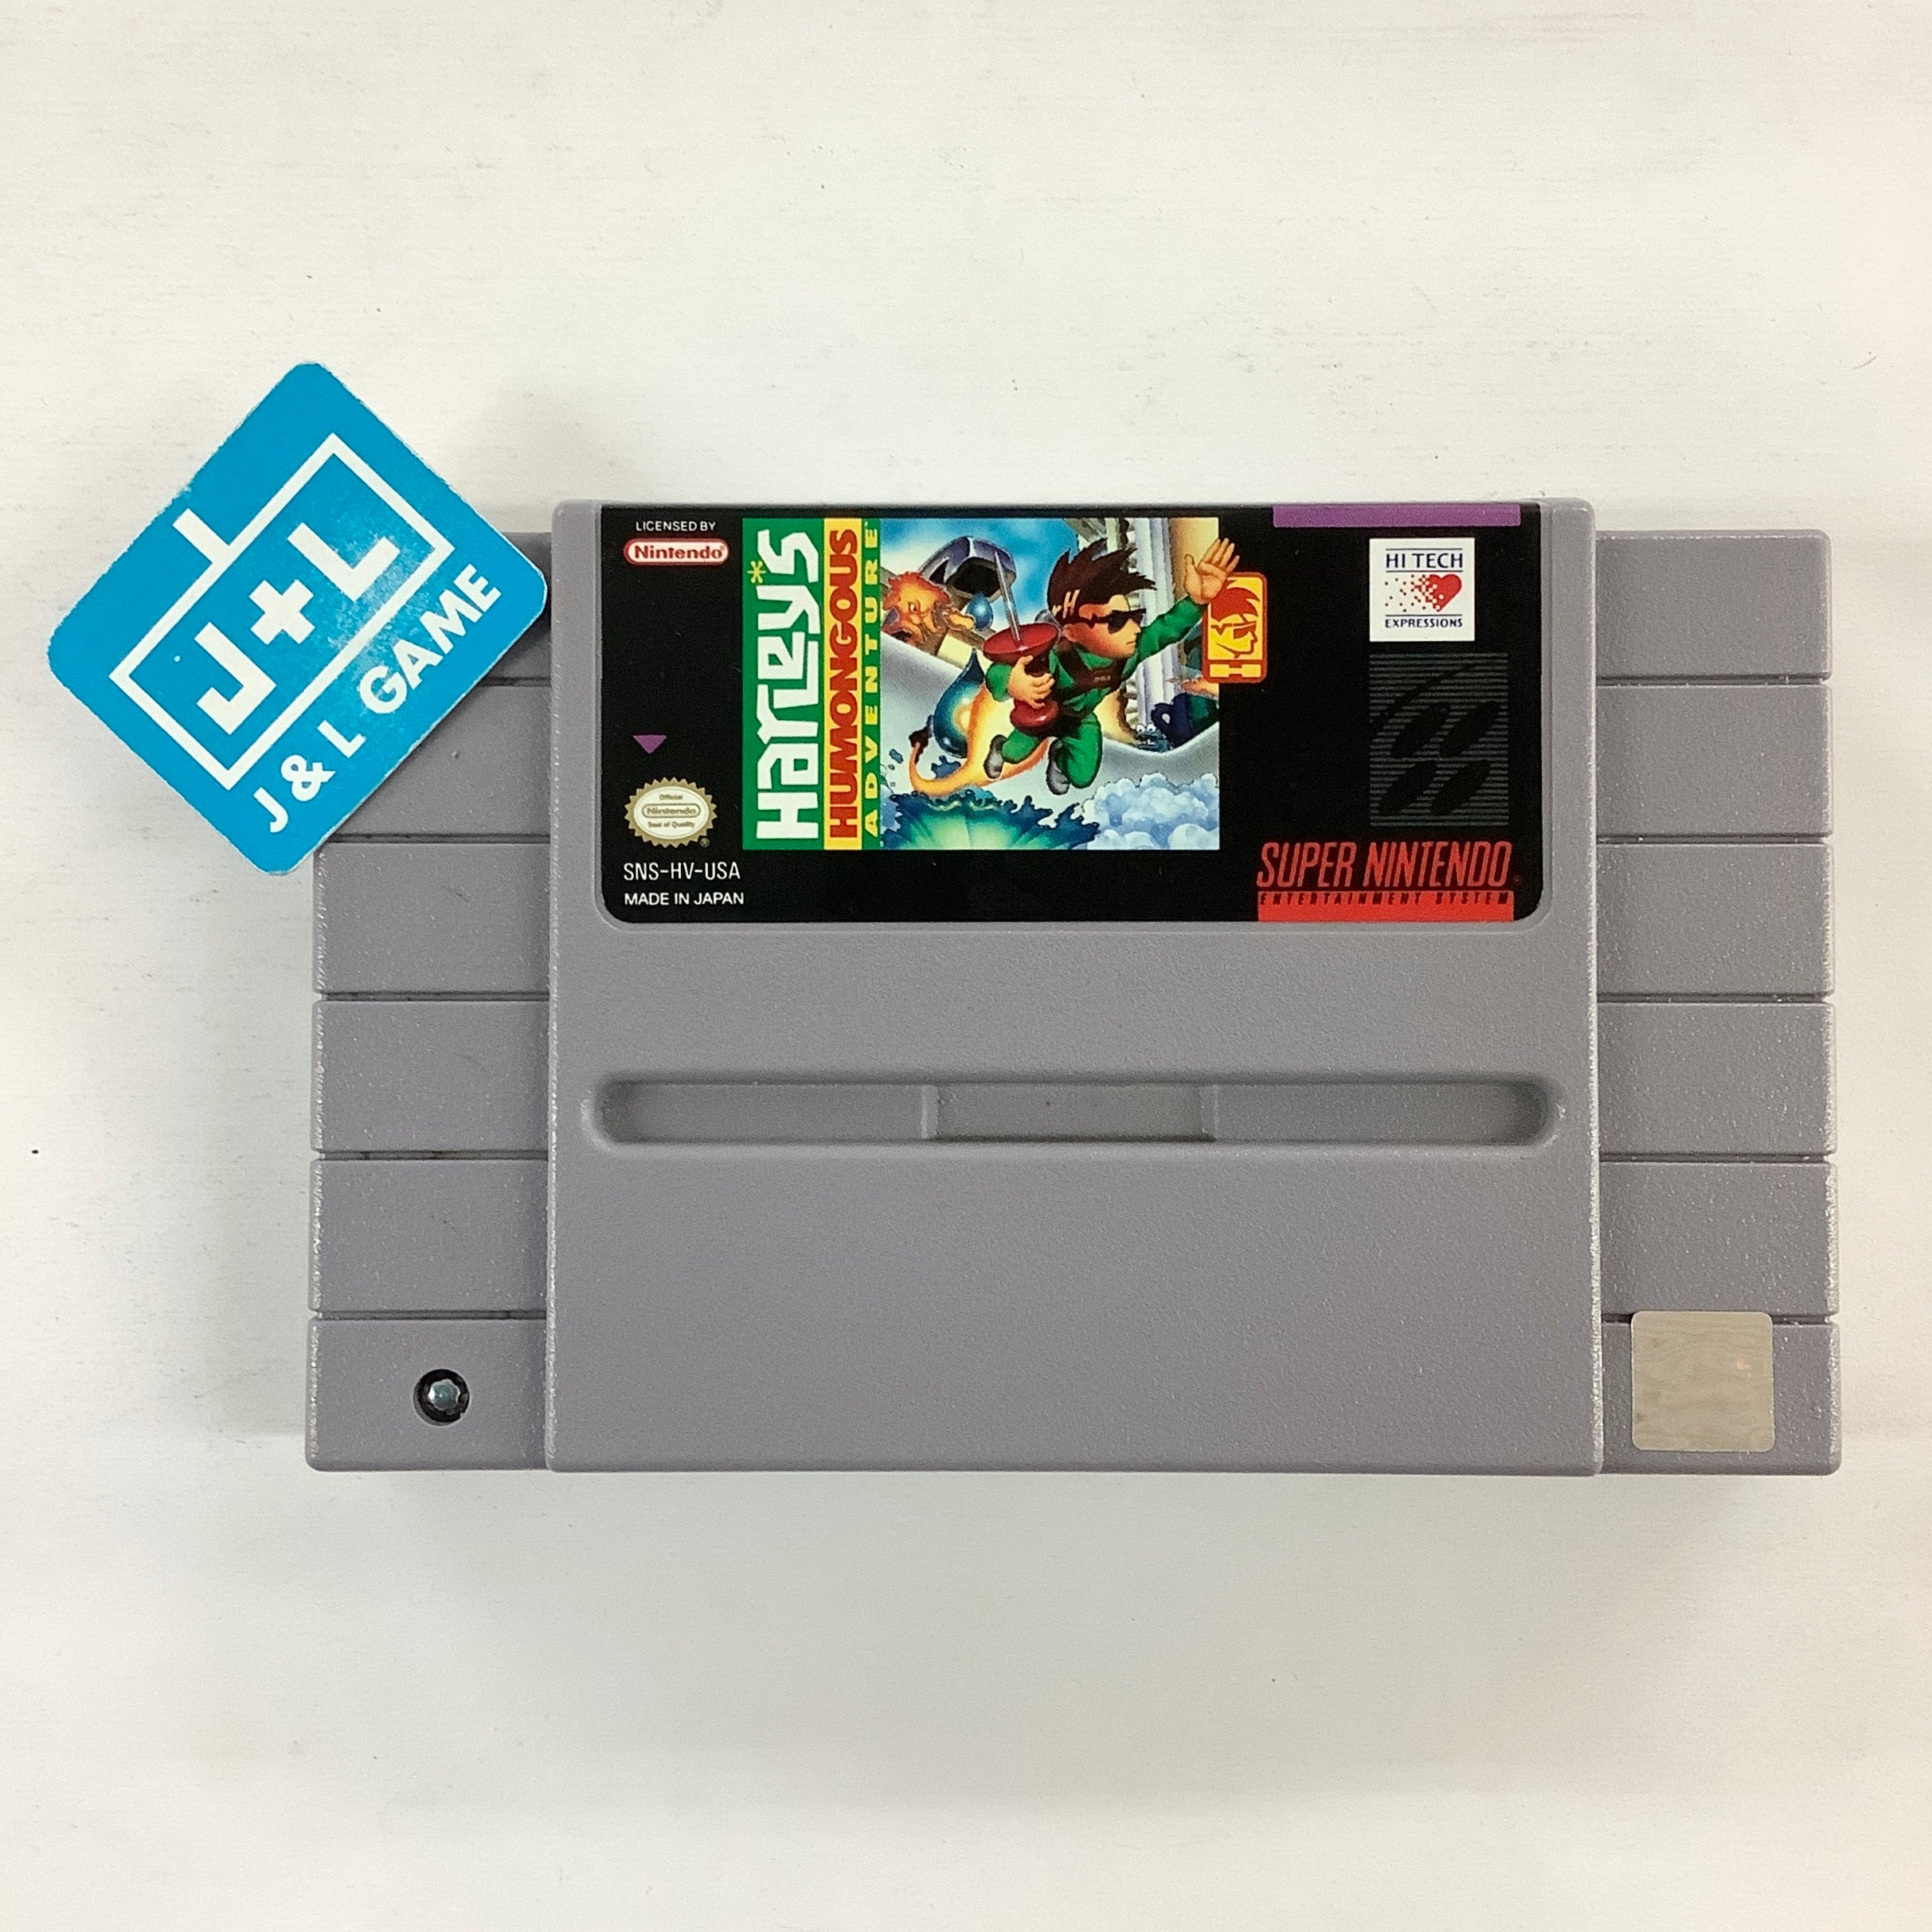 Harley's Humongous Adventure - (SNES) Super Nintendo [Pre-Owned] Video Games Hi Tech Expressions   